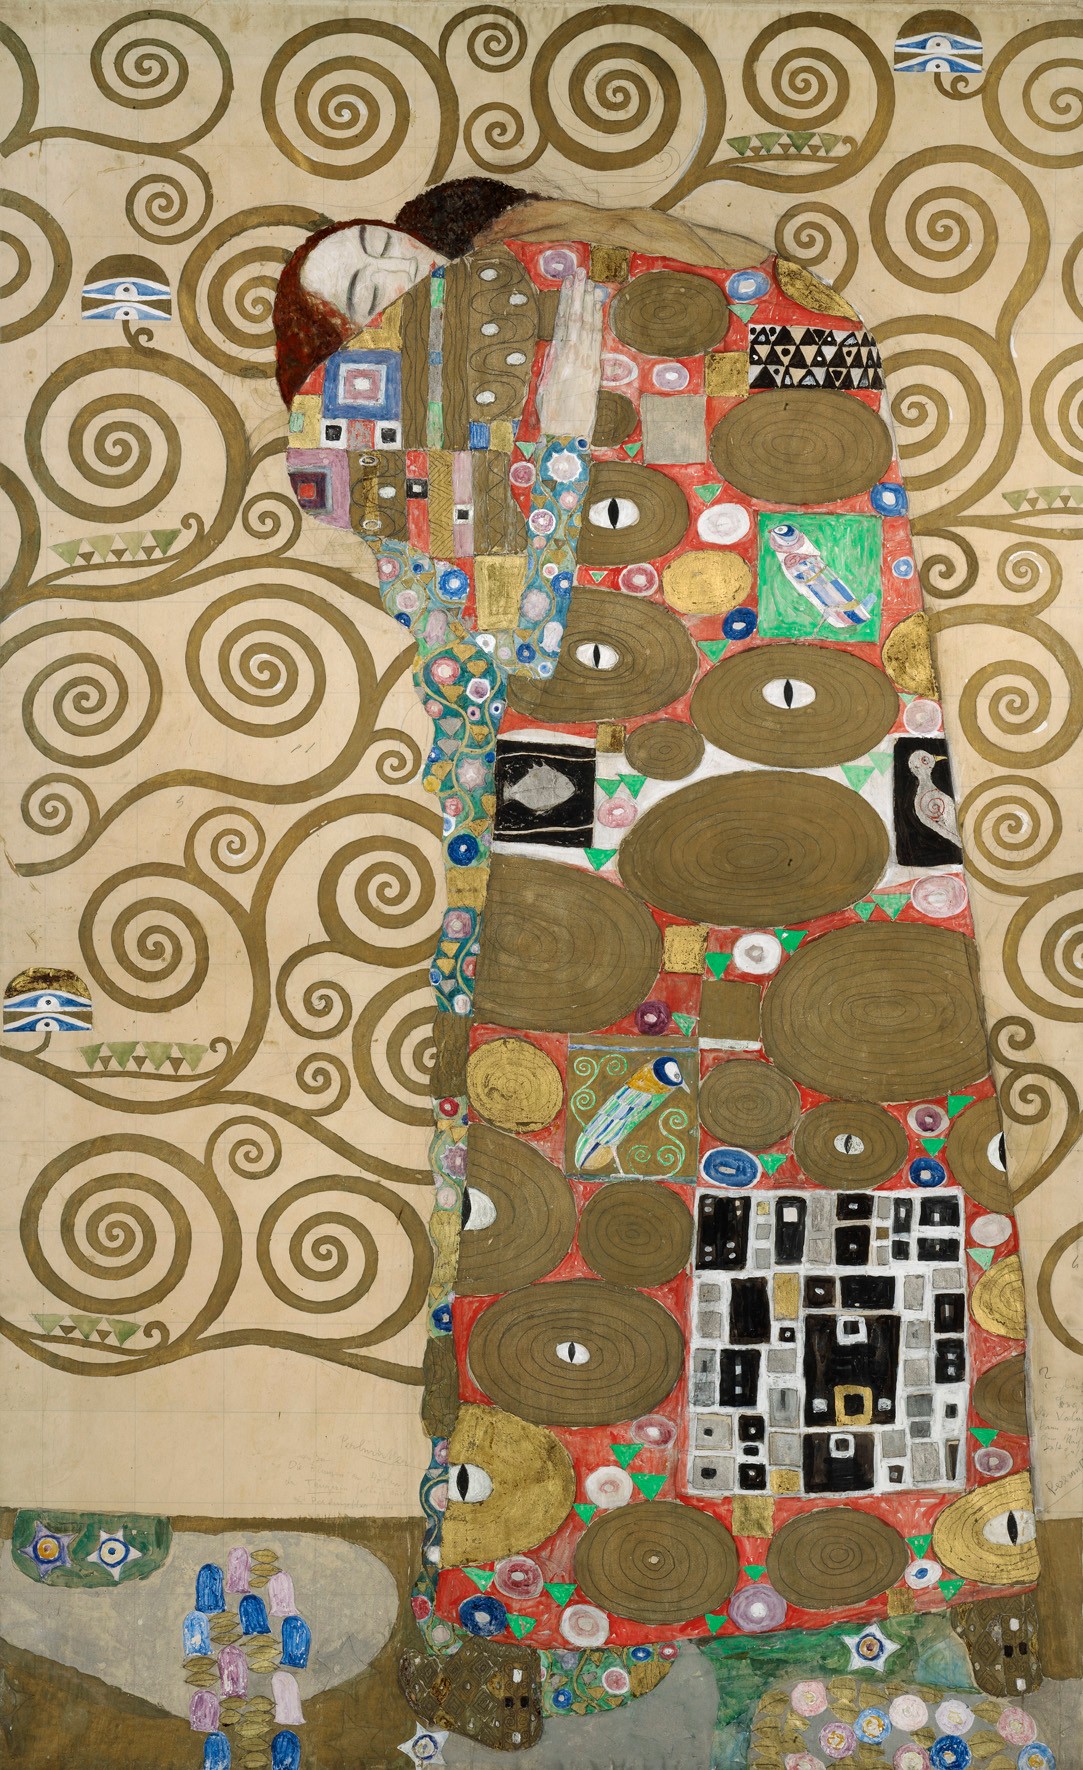 Gustav Klimt, Cartoon for the Embrace of Stoclet Palace (1911; pencil, pastels and metals on paper, 2000 x 1020 mm; Vienna, Museum für angewandte Kunst)